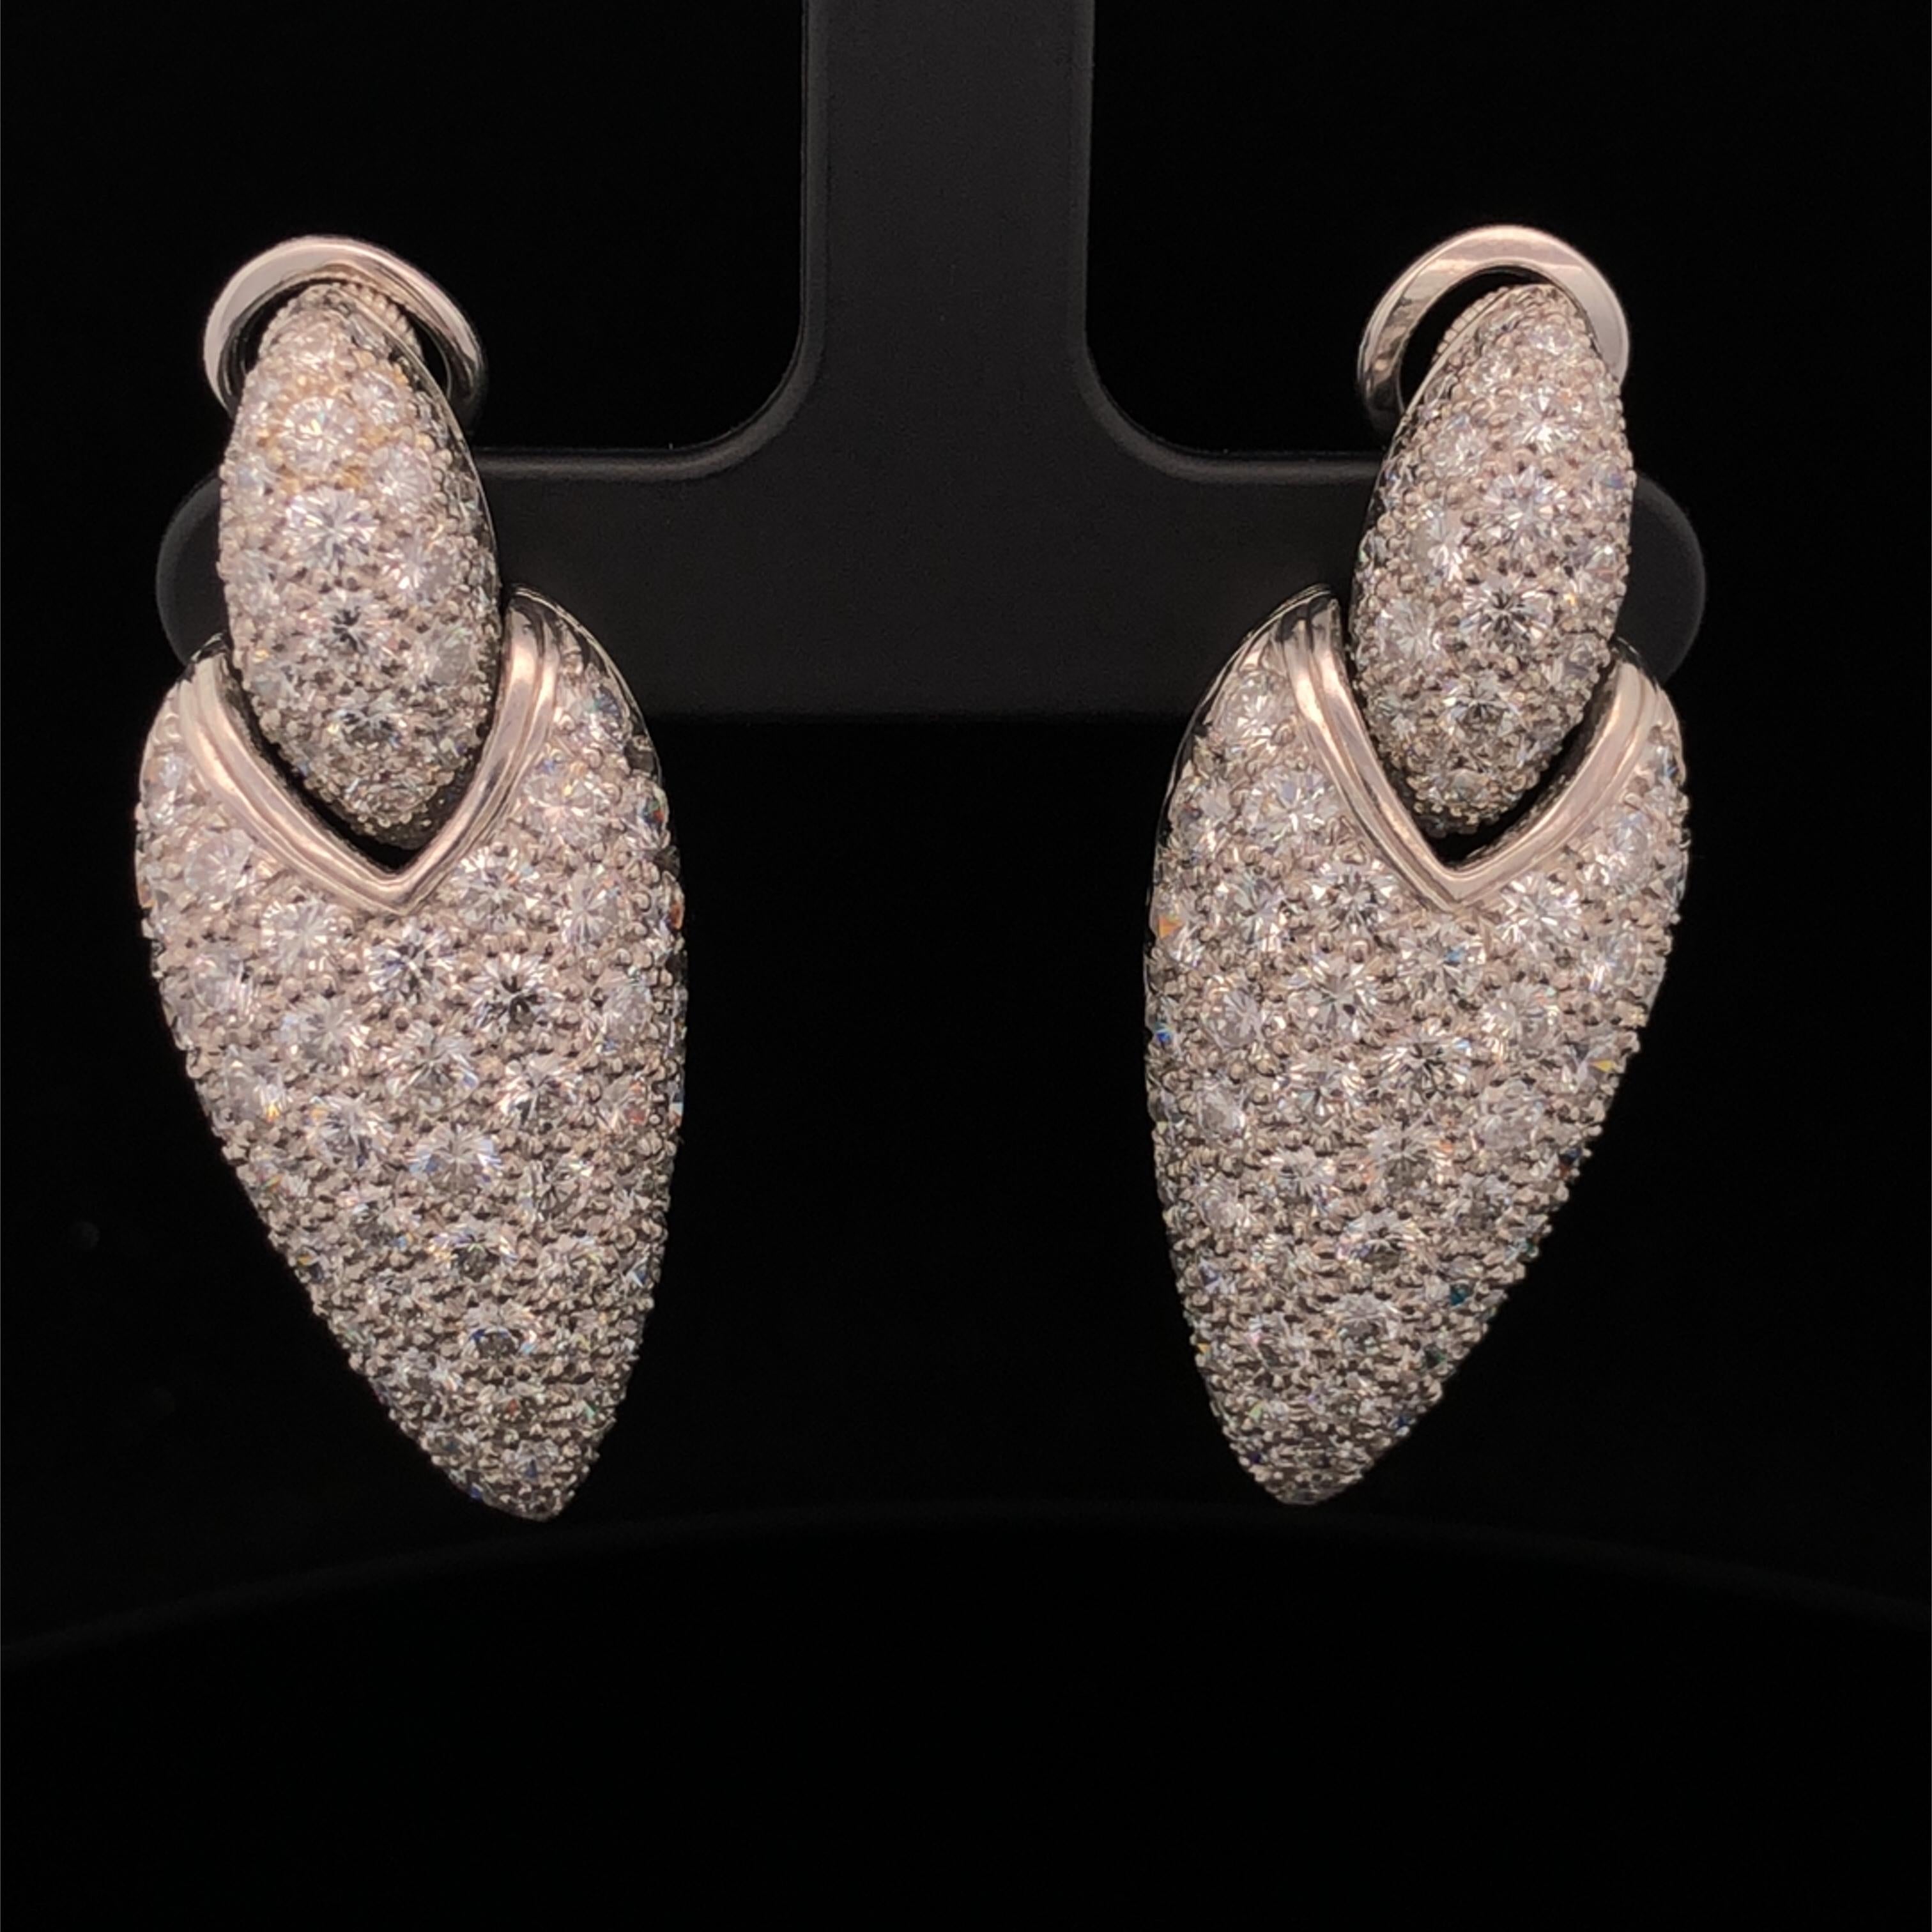 Oscar Heyman platinum 'door knocker' style earrings contain 8.58tcw of round diamonds, F-G/VS quality. They are individually stamped with the makers mark, IRID PLAT, and serial number 705038. Earrings have clips but we can add posts at no additional